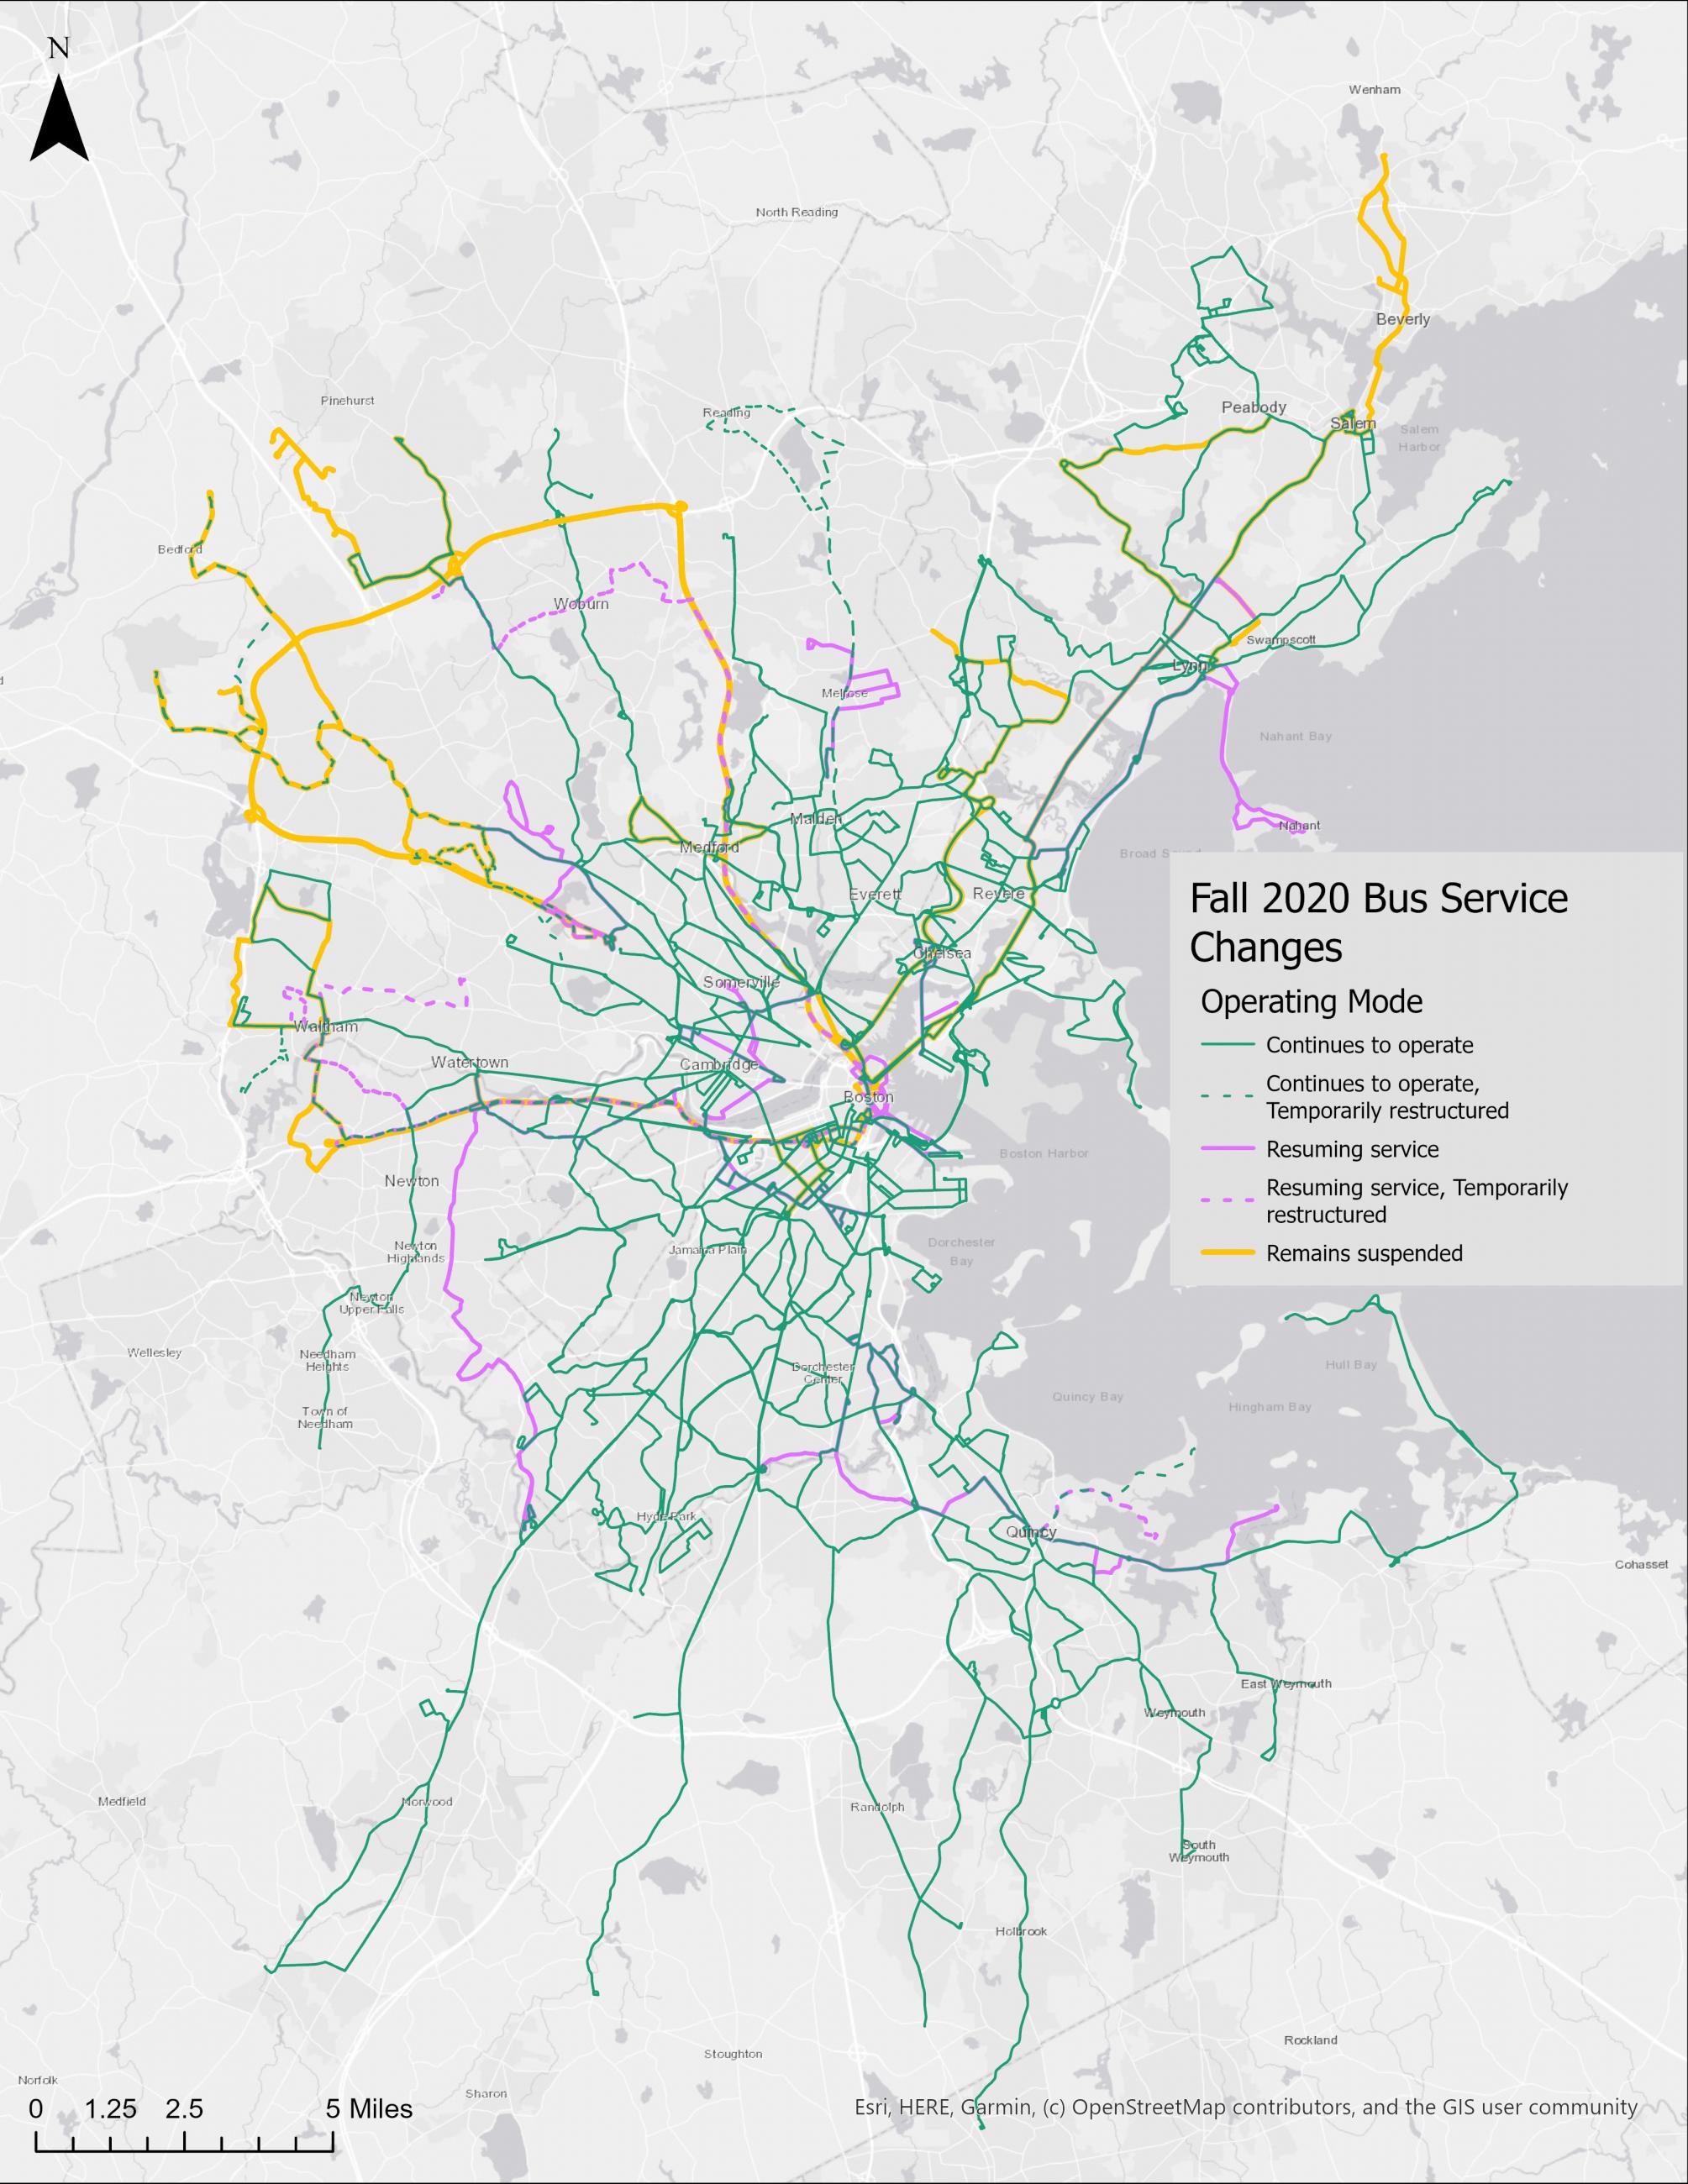 This image shows the changes in Operating Mode being implemented in the Fall 2020 bus service changes. More details on specific routes can be found on MBTA.com.